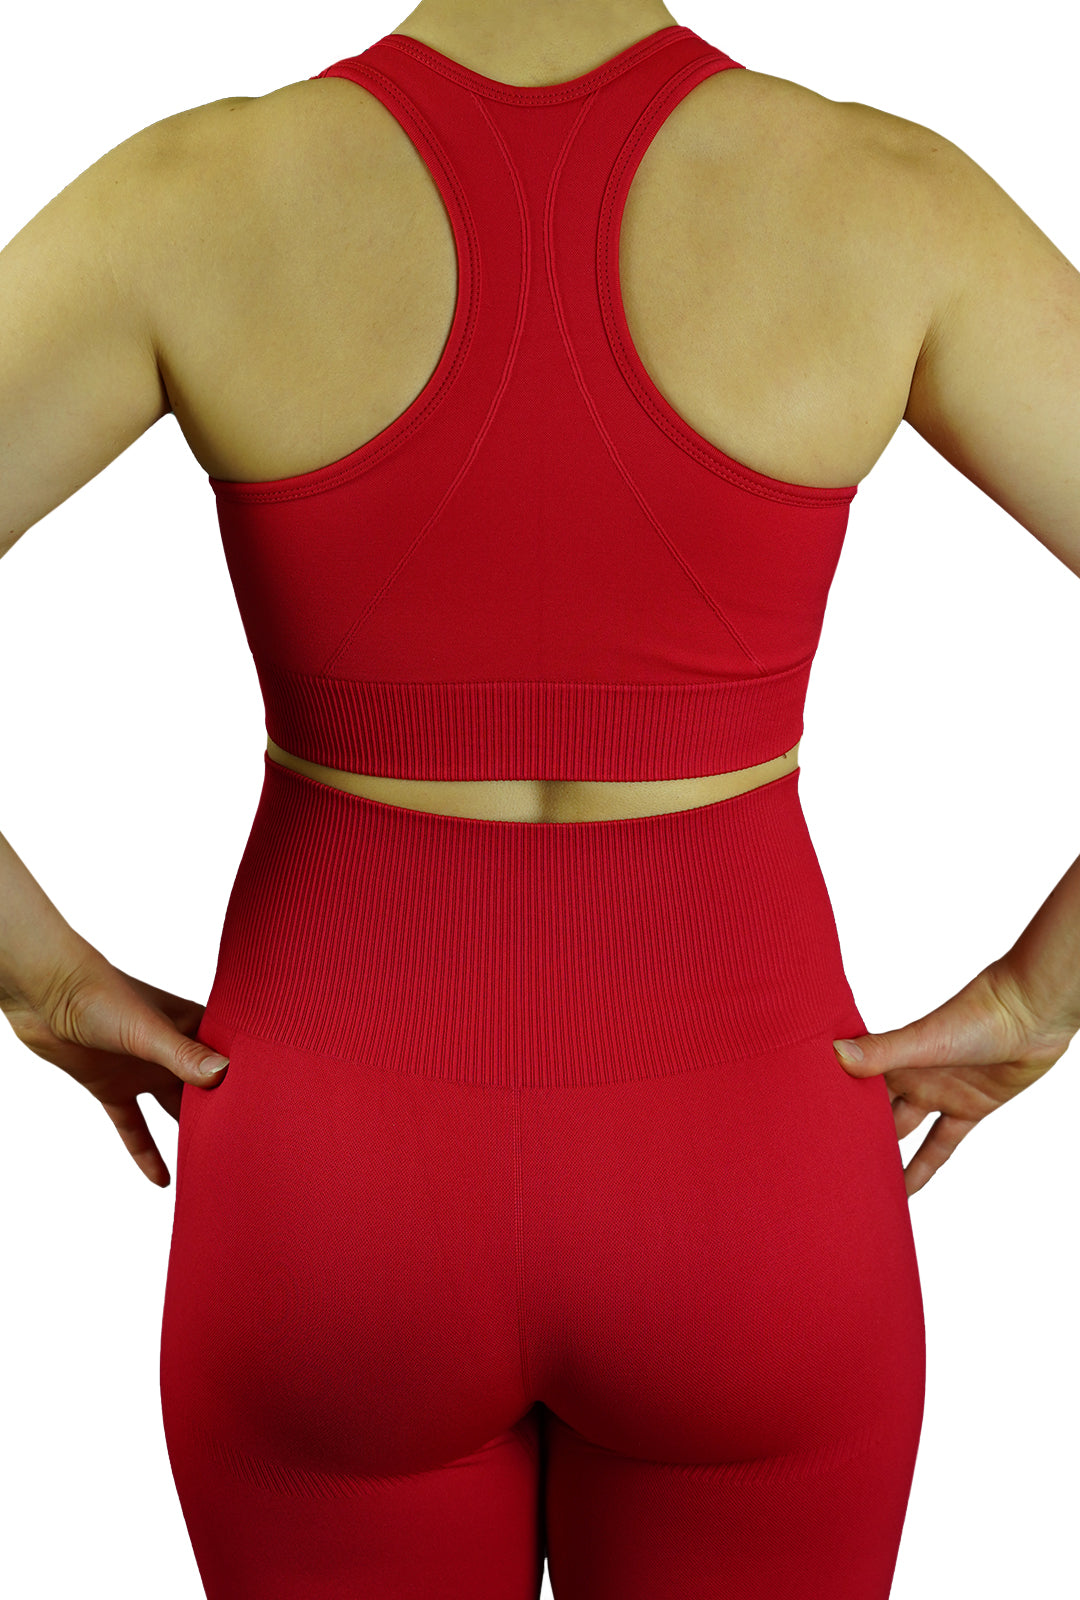 Sport Seamless Training top - Scarlet Red